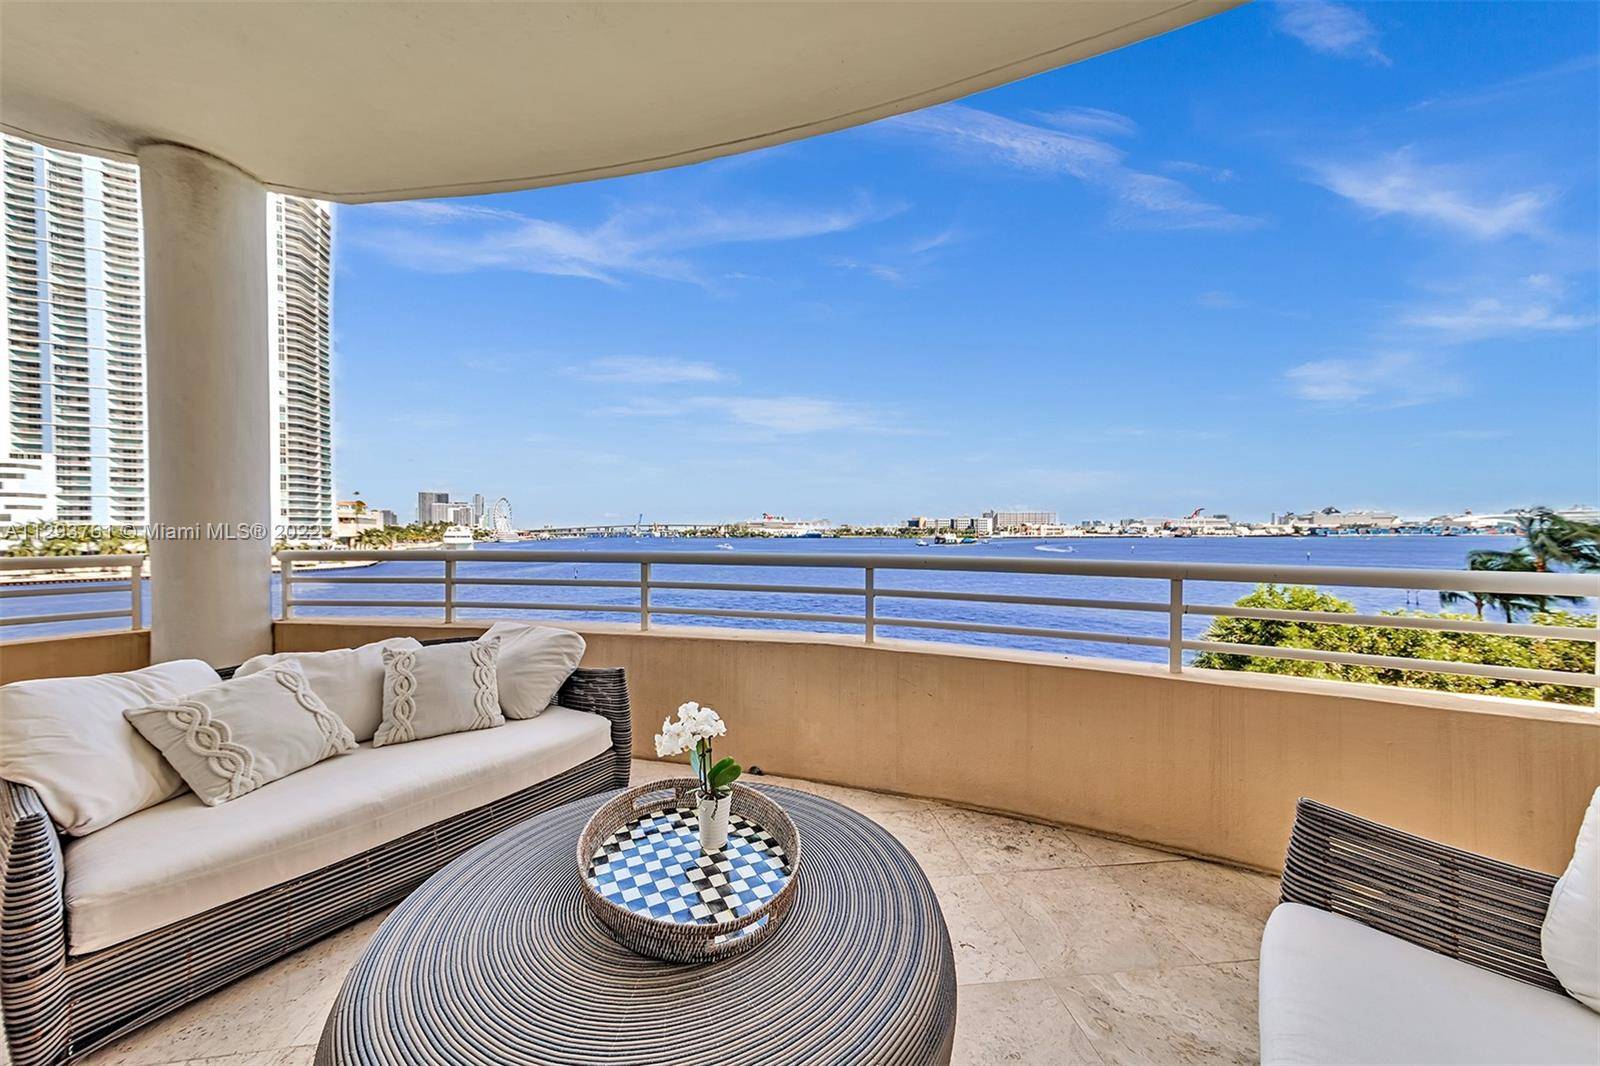 Unique condo in One Tequesta with the best views on Brickell Key Island.